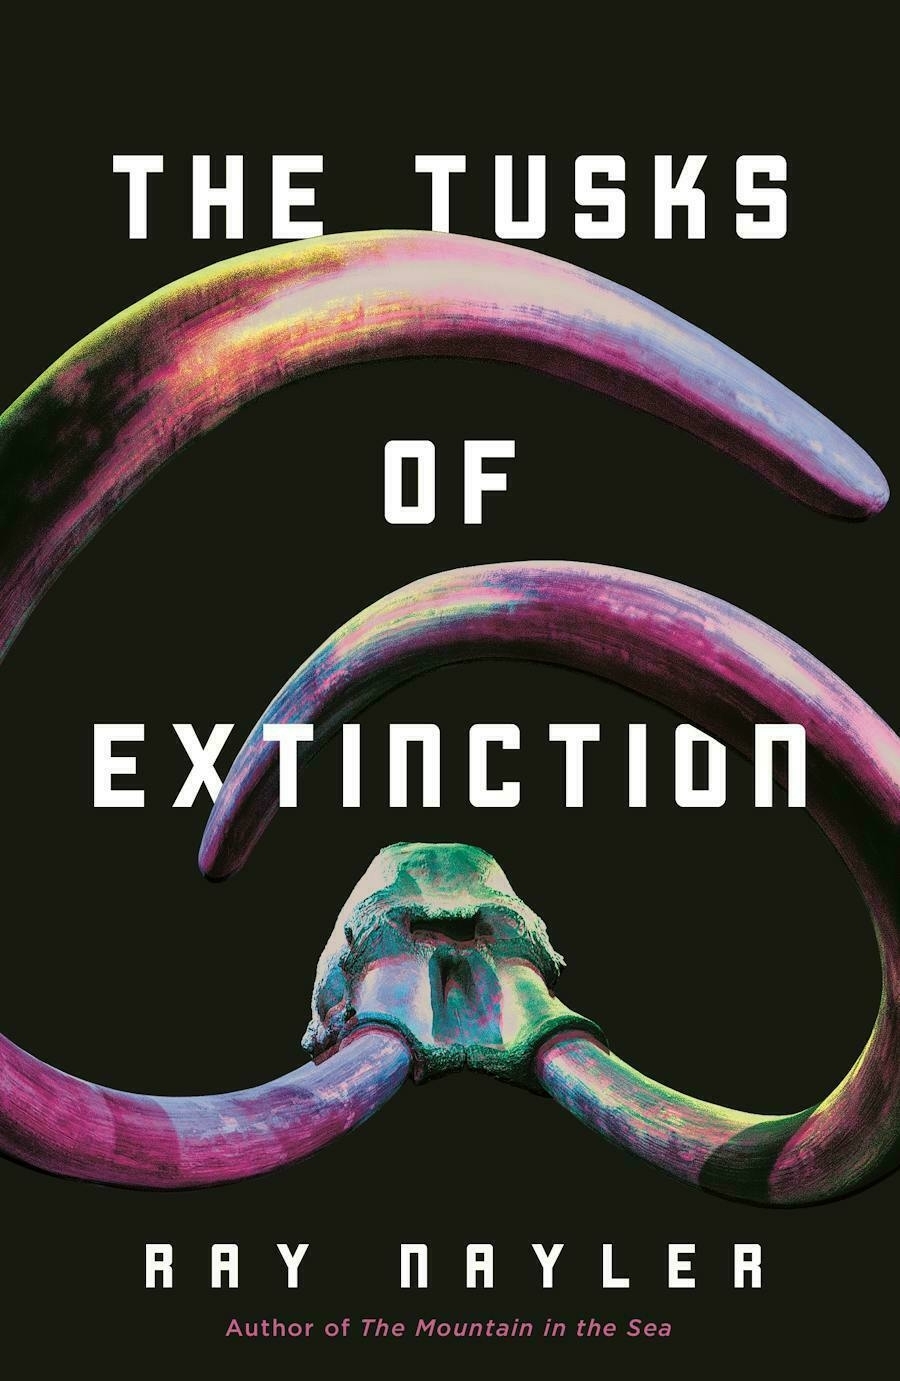 A book cover with the title THE TUSKS OF EXTINCTION by Ray Nayler, featuring a stylized skull with long, curved tusks against a black background.